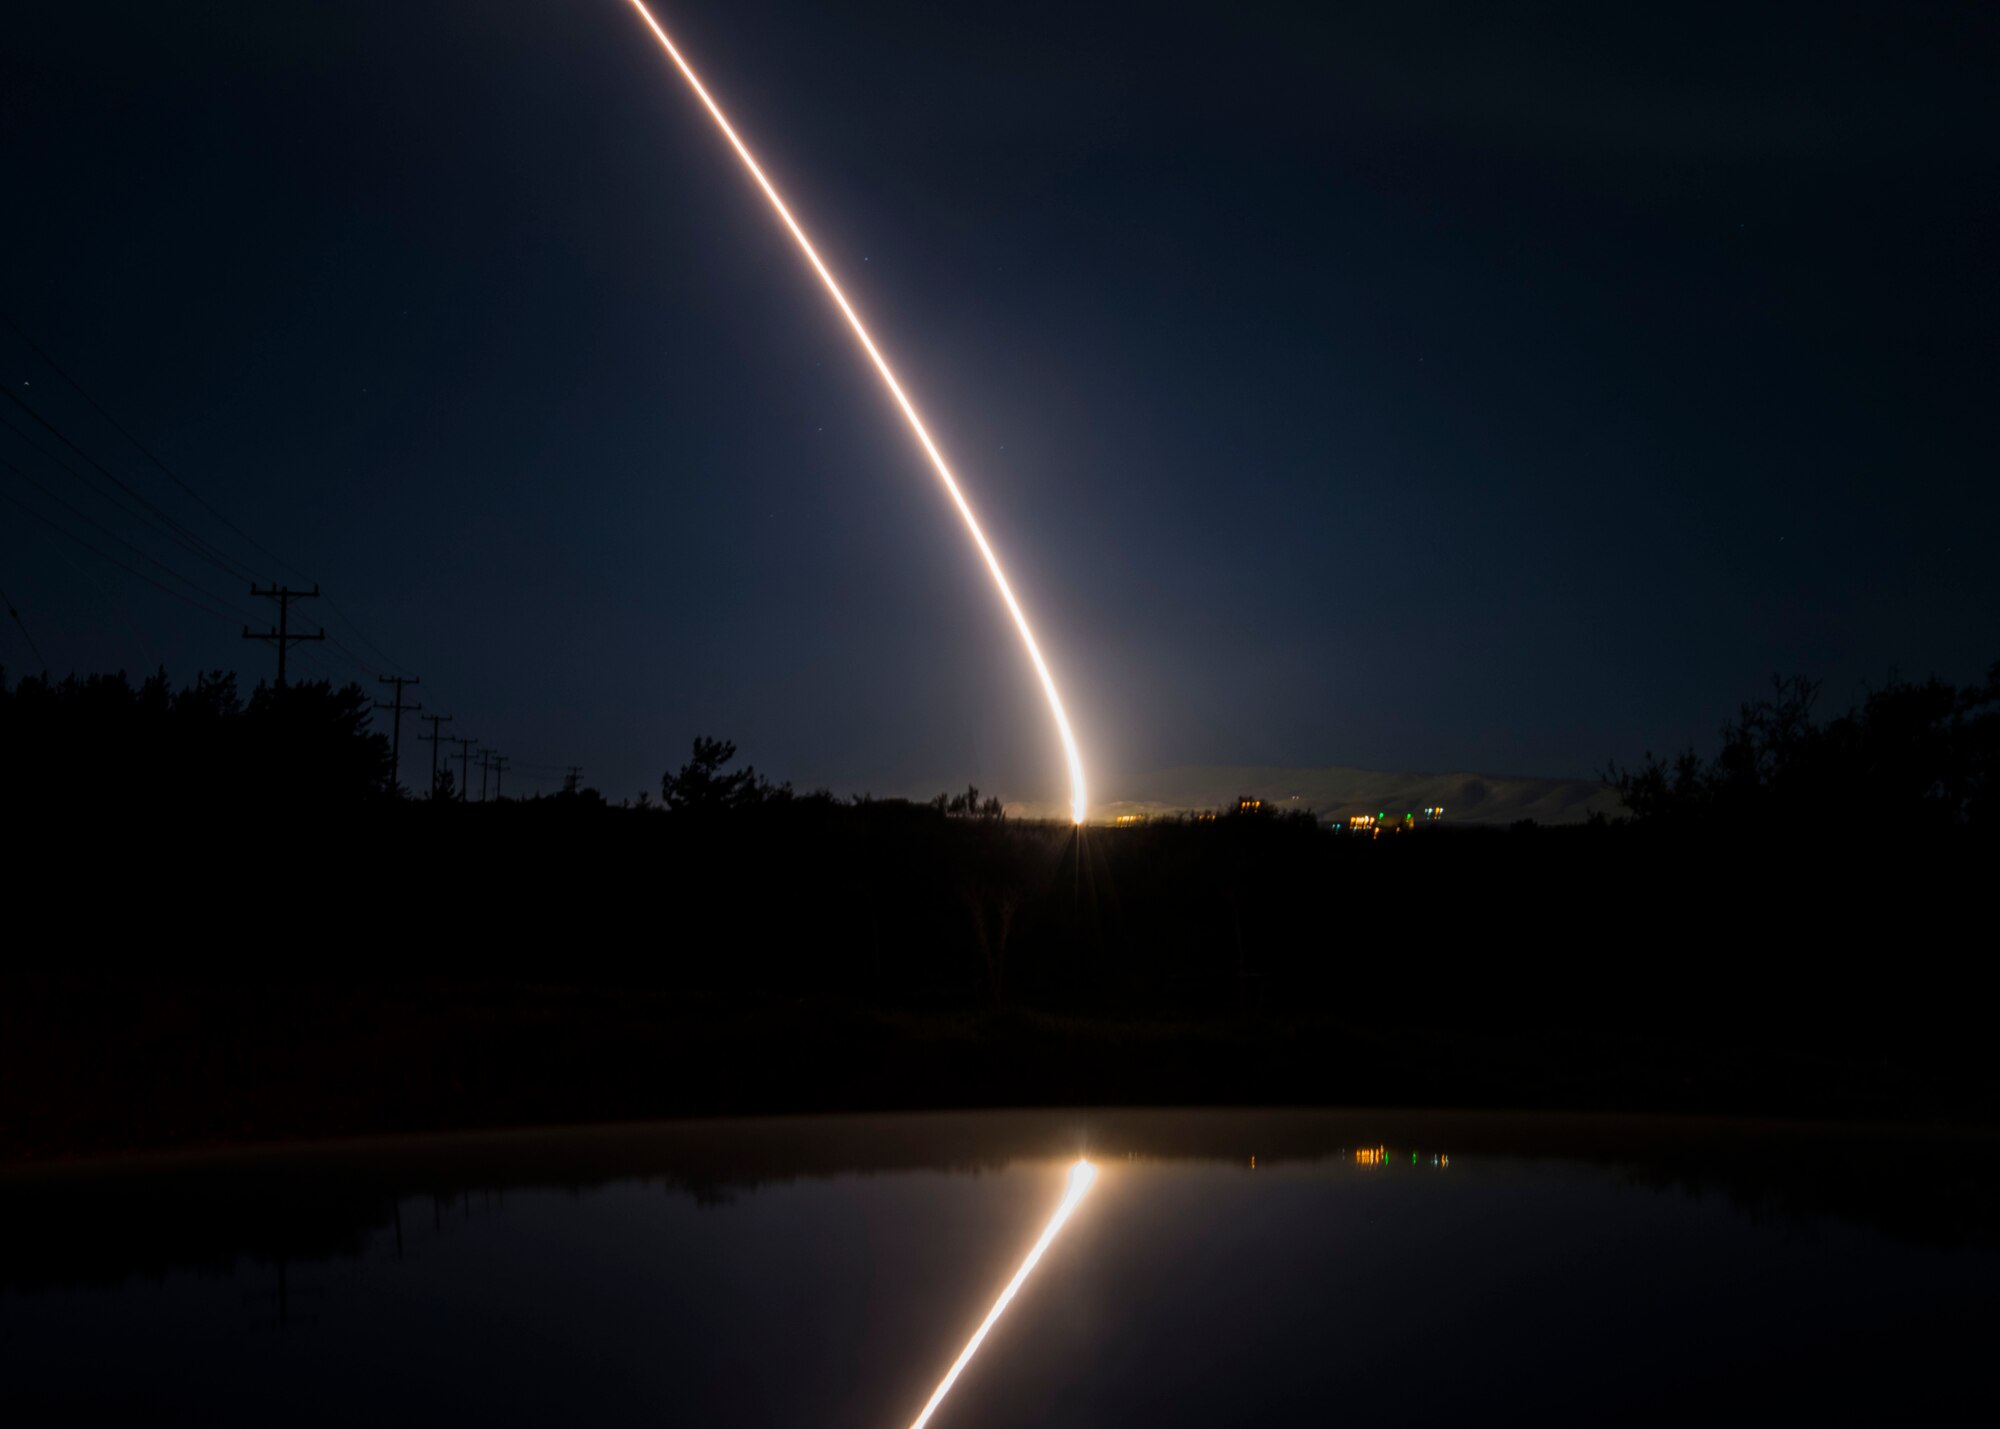 An unarmed Minuteman III intercontinental ballistic missile launches during a developmental test at 12:33 a.m. Pacific Time Wednesday, Feb. 5, 2020, at Vandenberg Air Force Base, Calif. (U.S. Air Force photo by Airman 1st Class Aubree Milks)